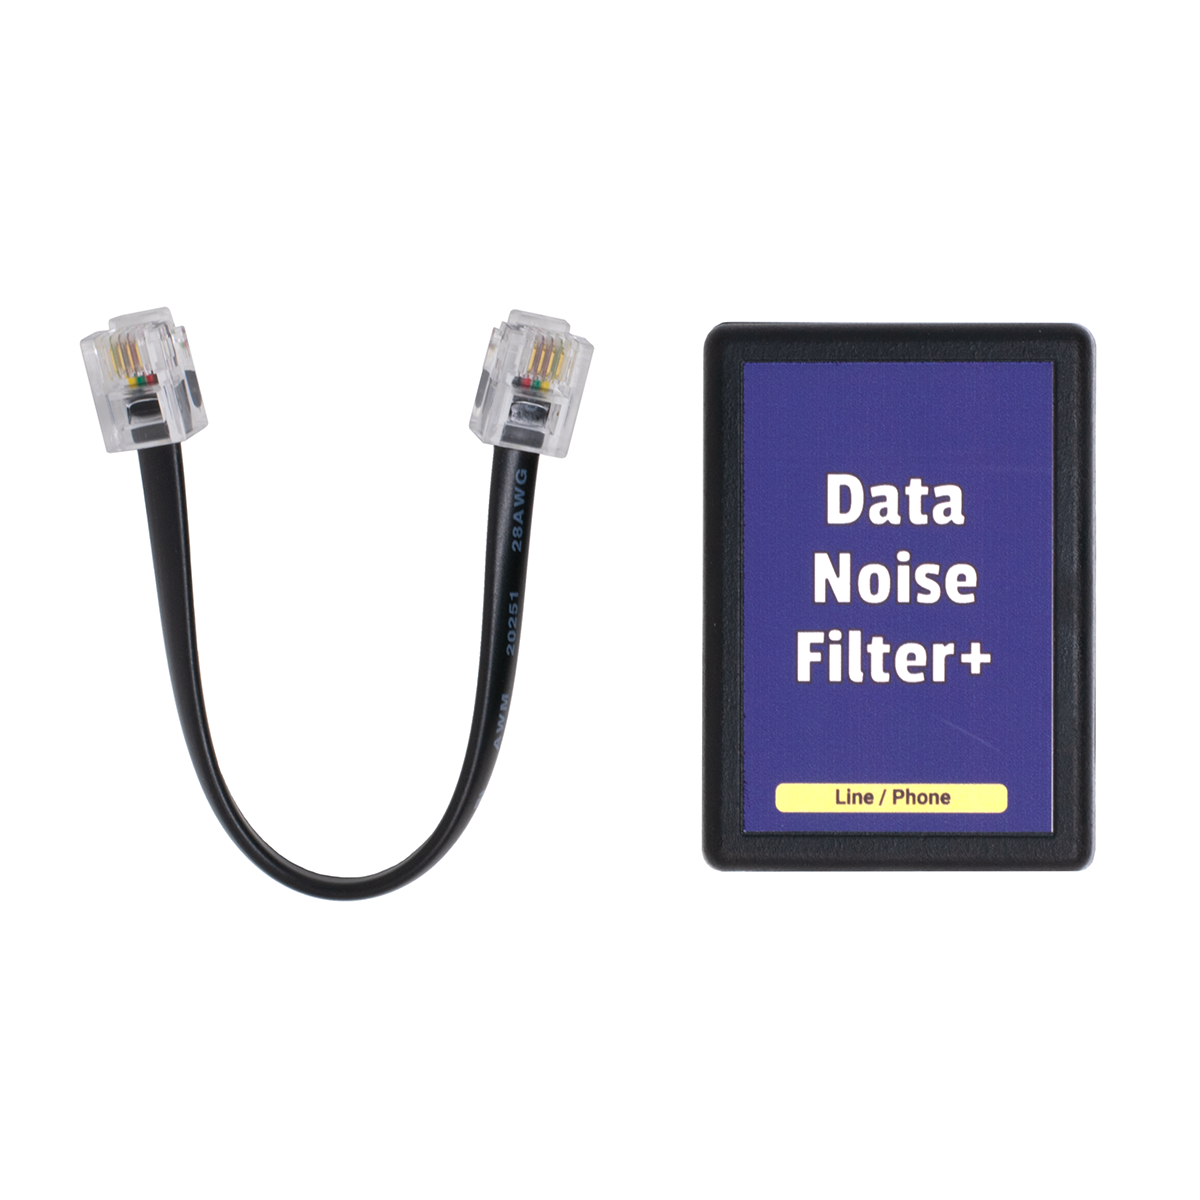 Data Noise Filter+ with Cord